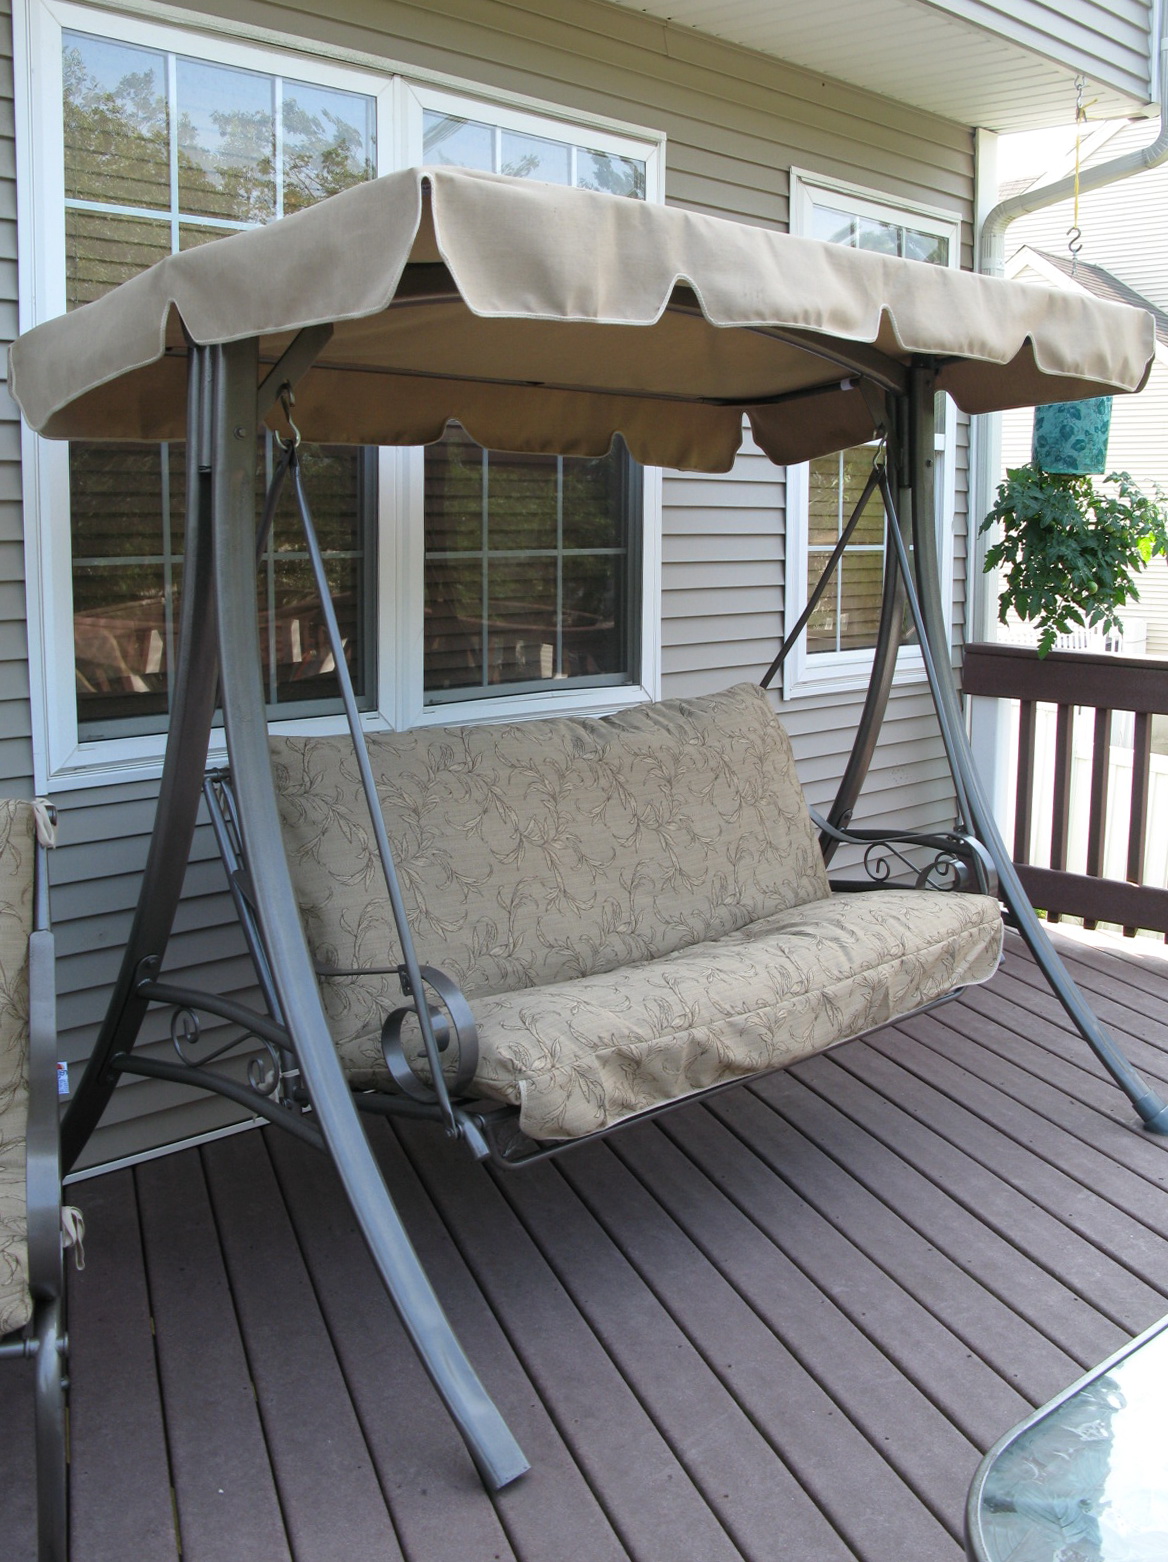 Patio Swing Cushion And Canopy Replacement | Home Design Ideas